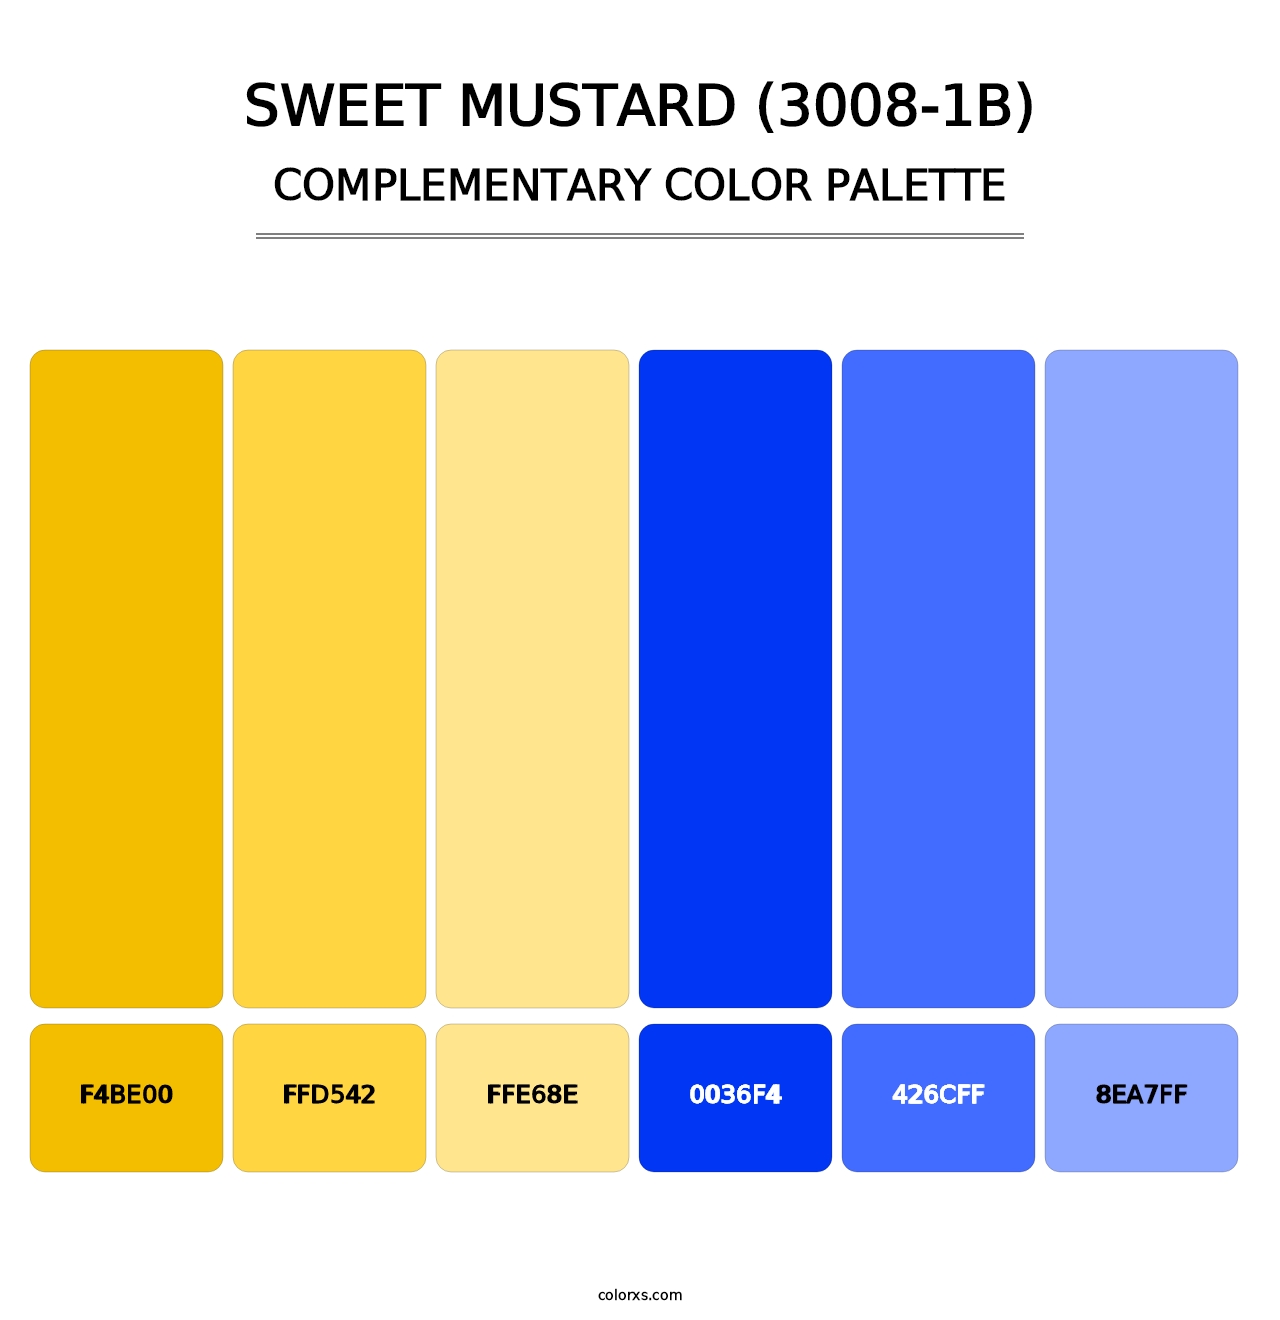 Sweet Mustard (3008-1B) - Complementary Color Palette